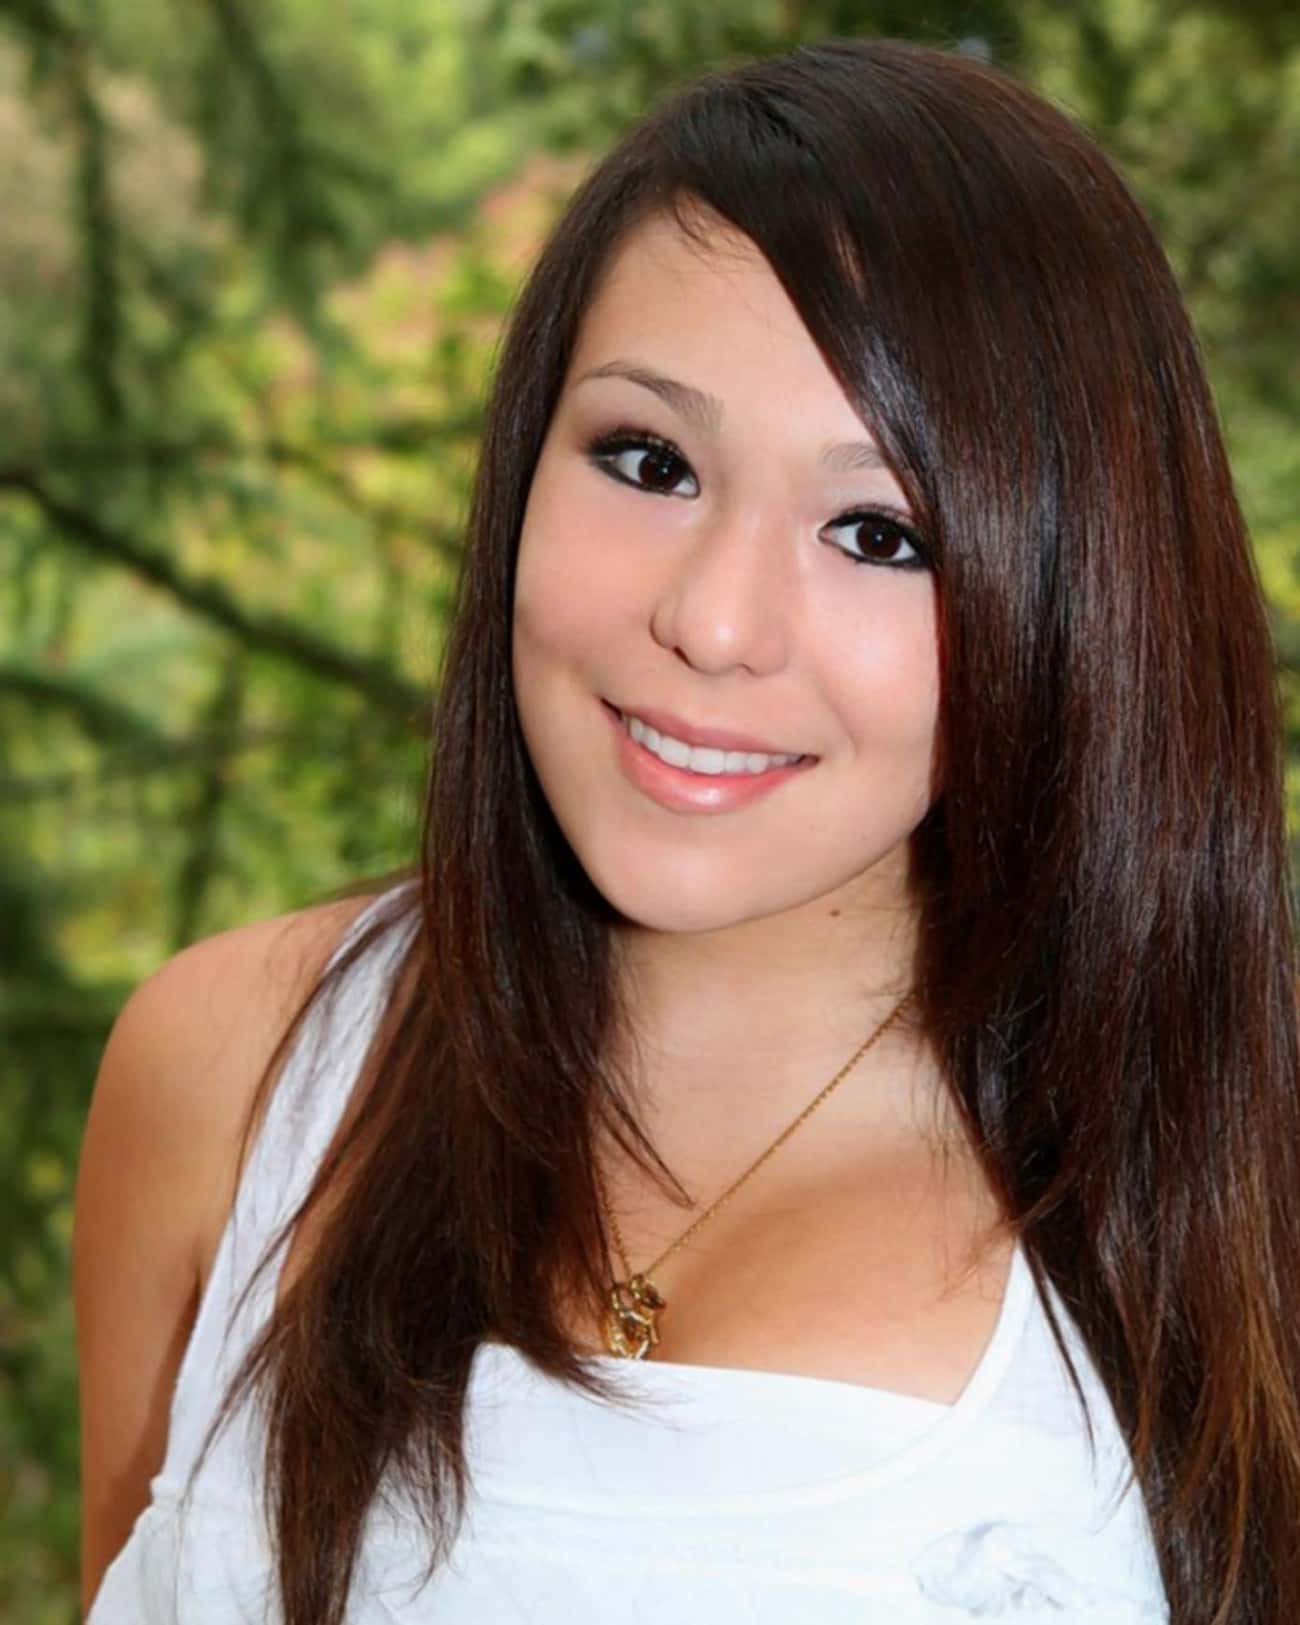 Audrie Pott Was Assaulted At A Party And Ended Her Life Days Later